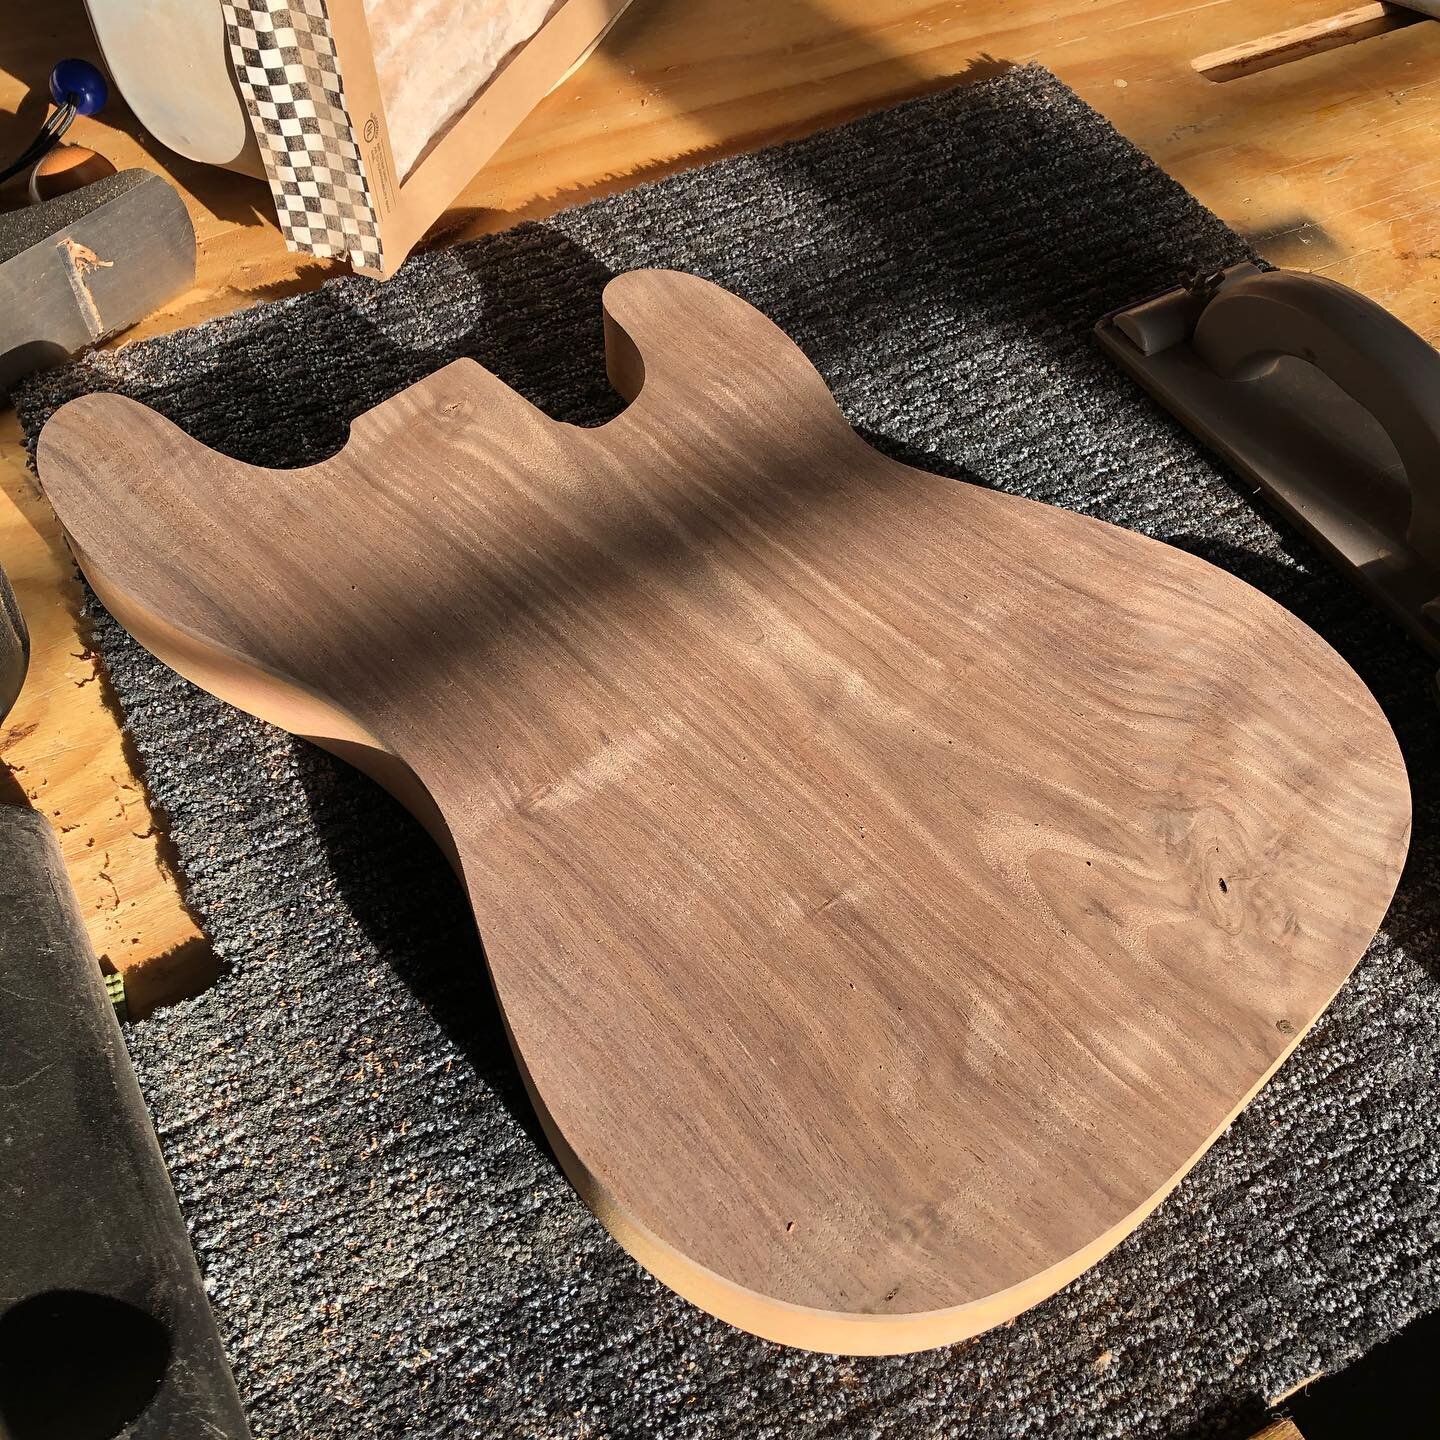 Walnut top over cedar body bass coming together. Really curious to hear how this thing sounds.